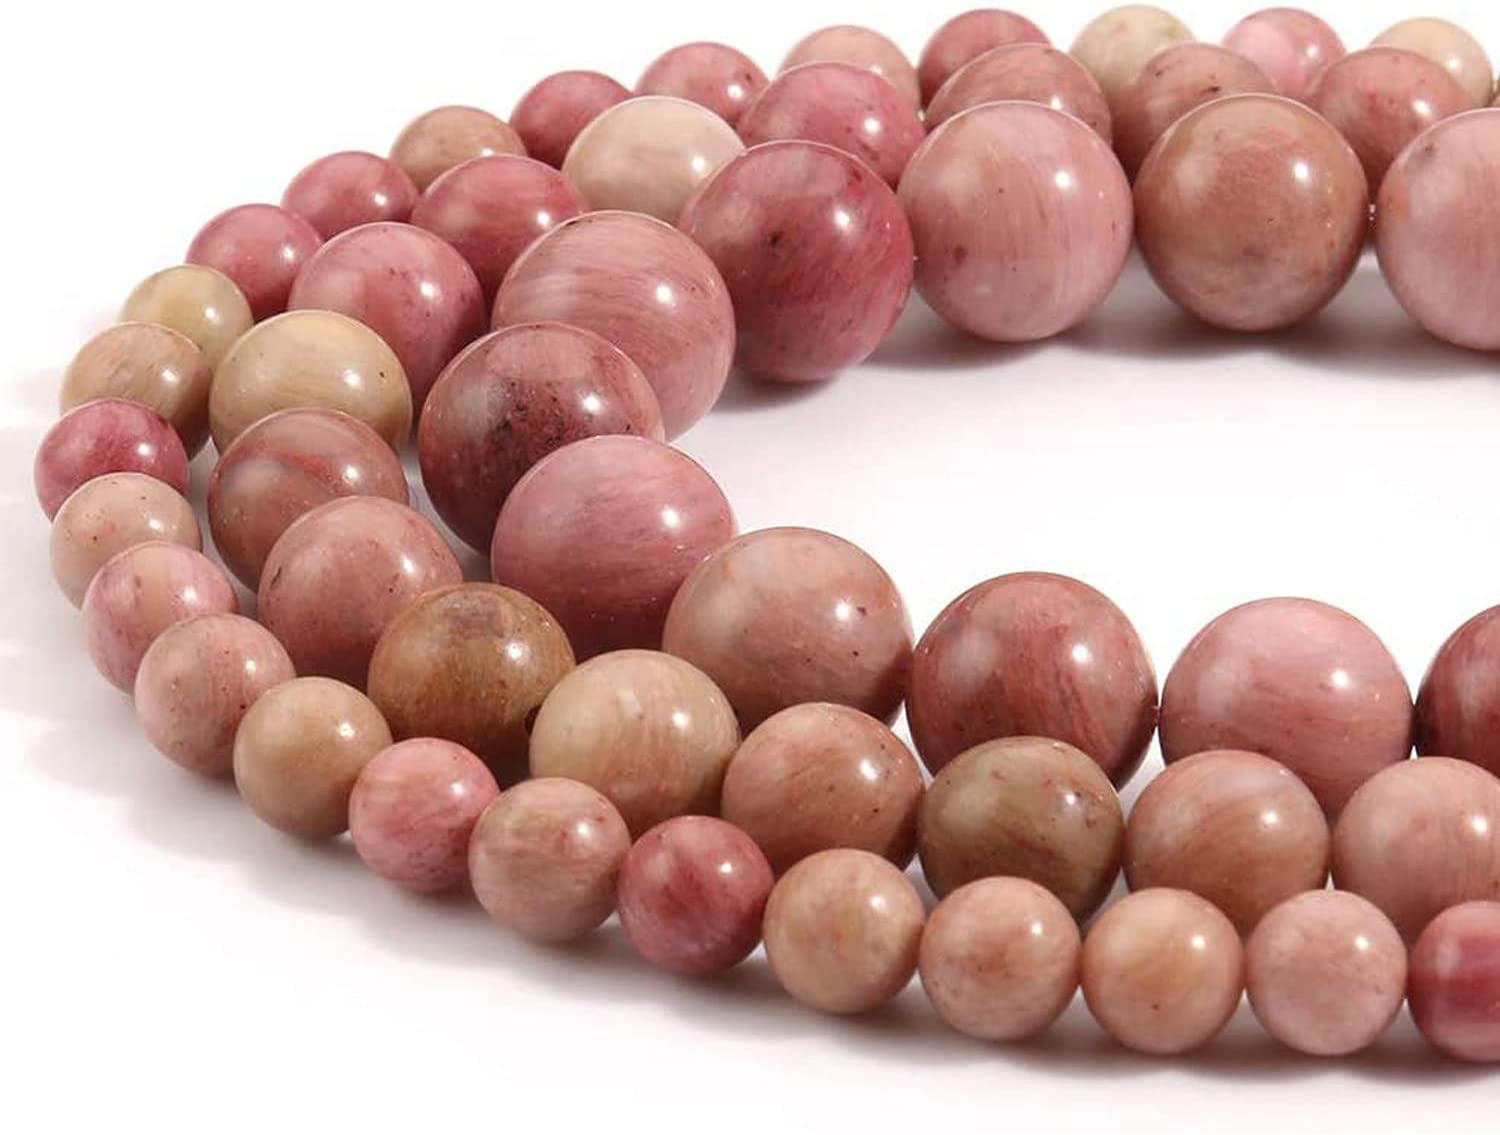 95-100pcs/strand 4mm Natural Gold Sandstone Beads Round Gemstone Loose Beads for Jewelry Making